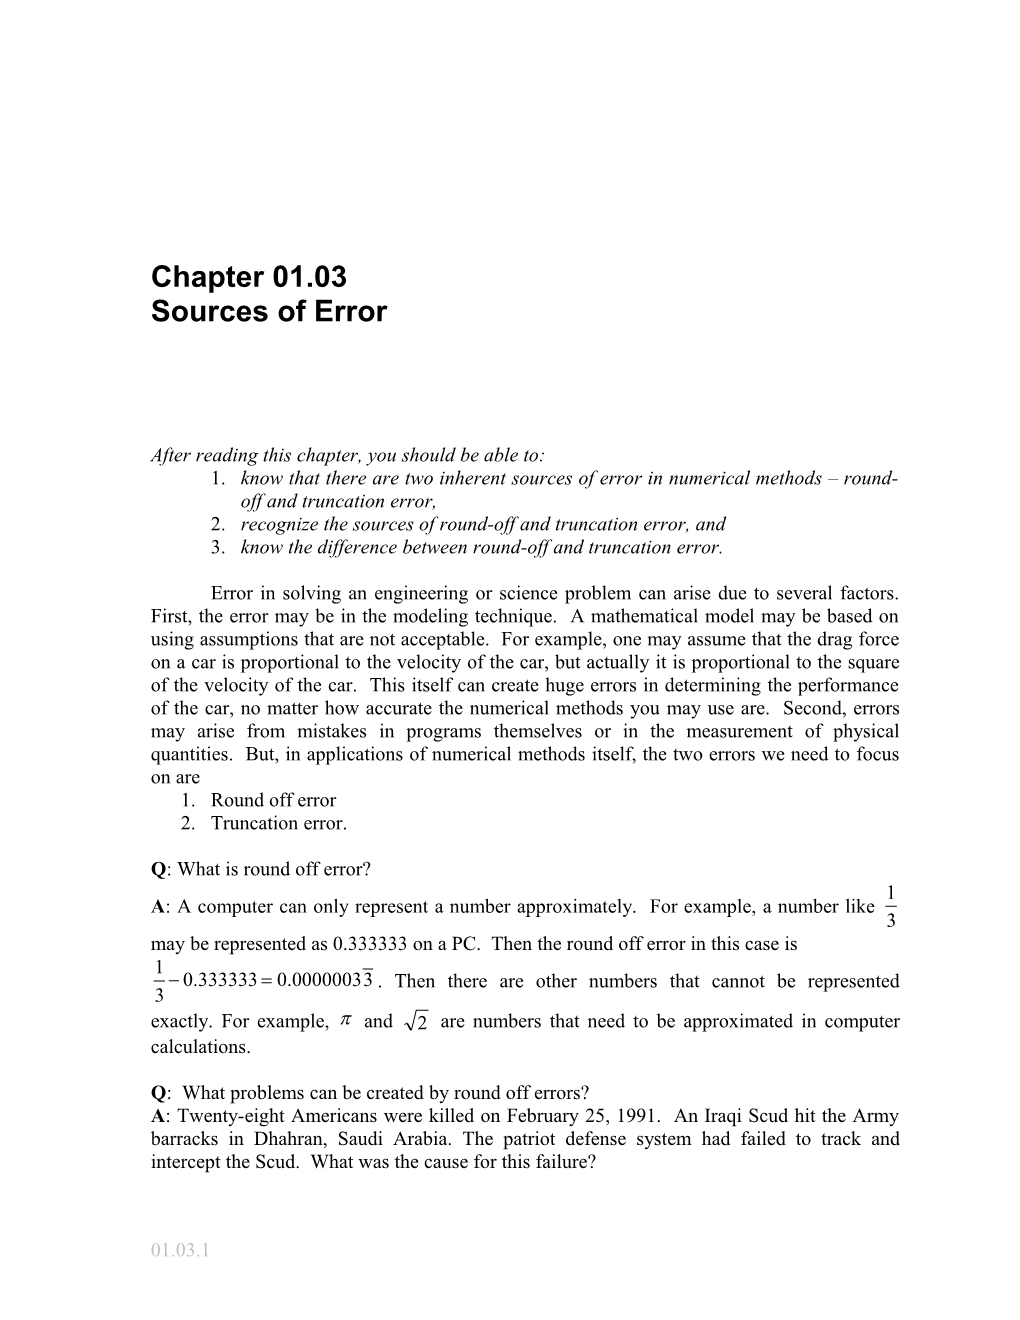 Textbook Notes on Sources of Error